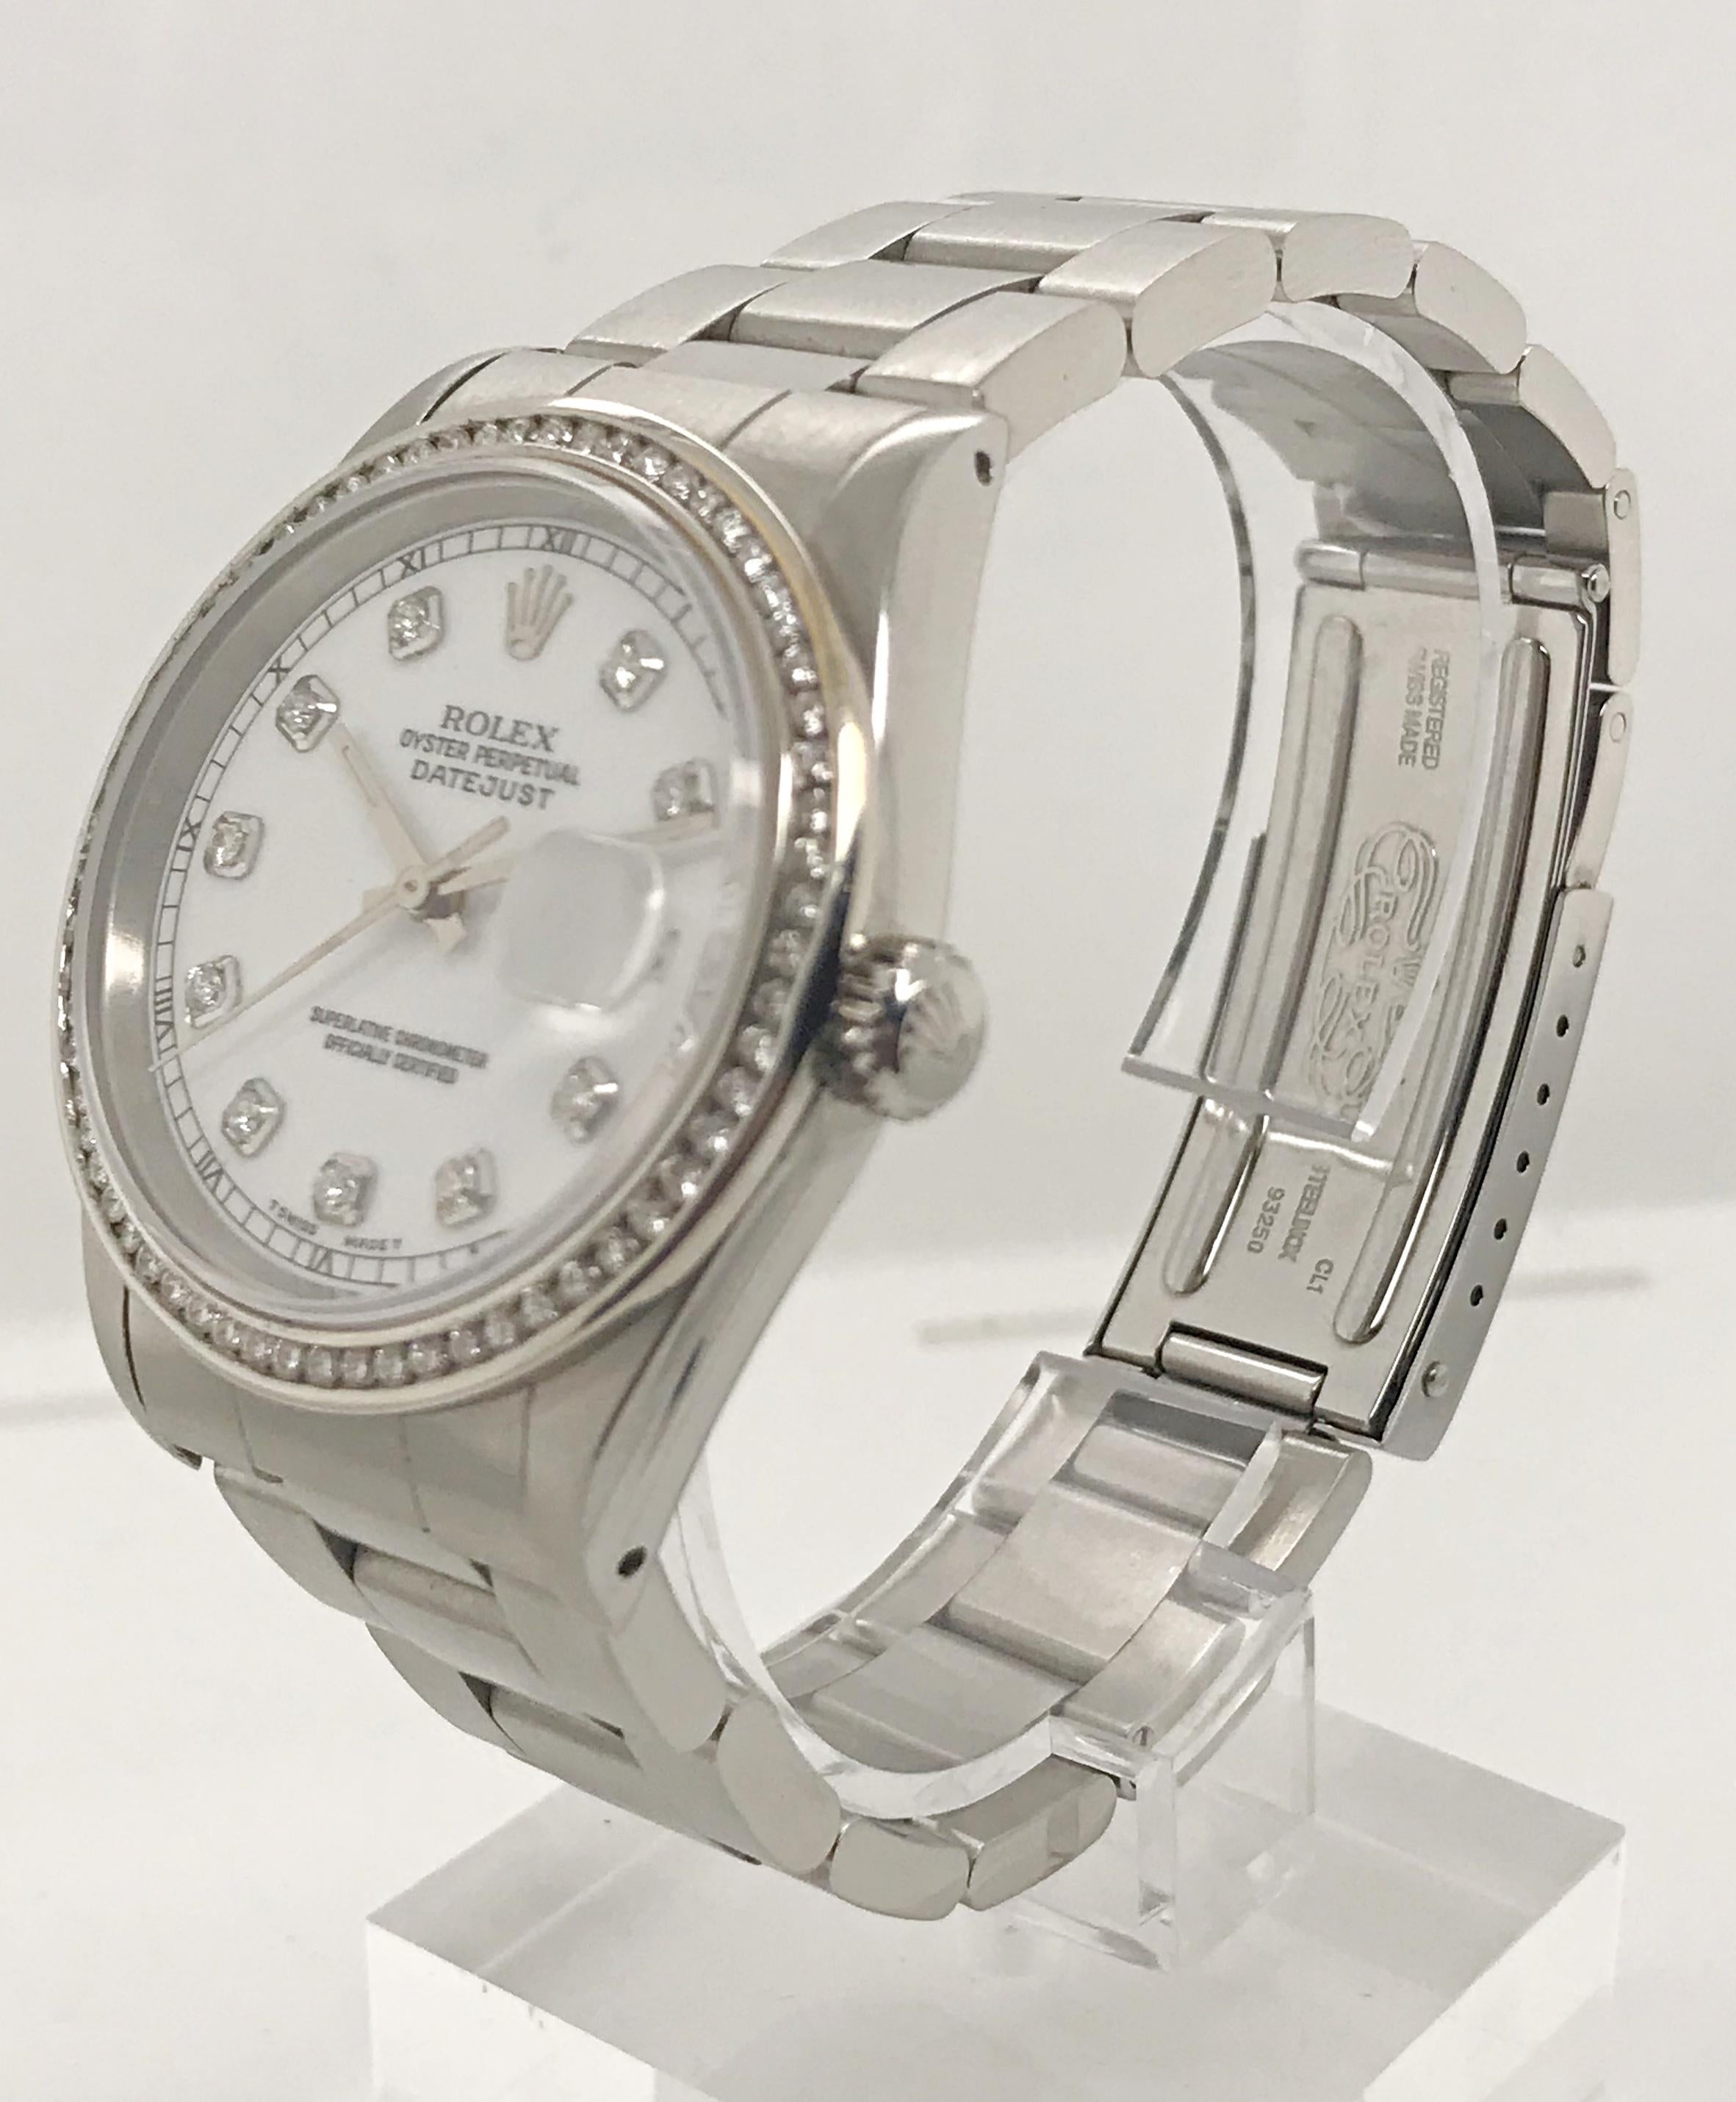 36mm Rolex Datejust with diamond bezel and diamond dial on a Stainless Steel Oysterlink Bracelet from circa 1991. 

Serial Number - X******

Model Number - 16220

This timepiece has been recently serviced and authenticated by a Rolex certified